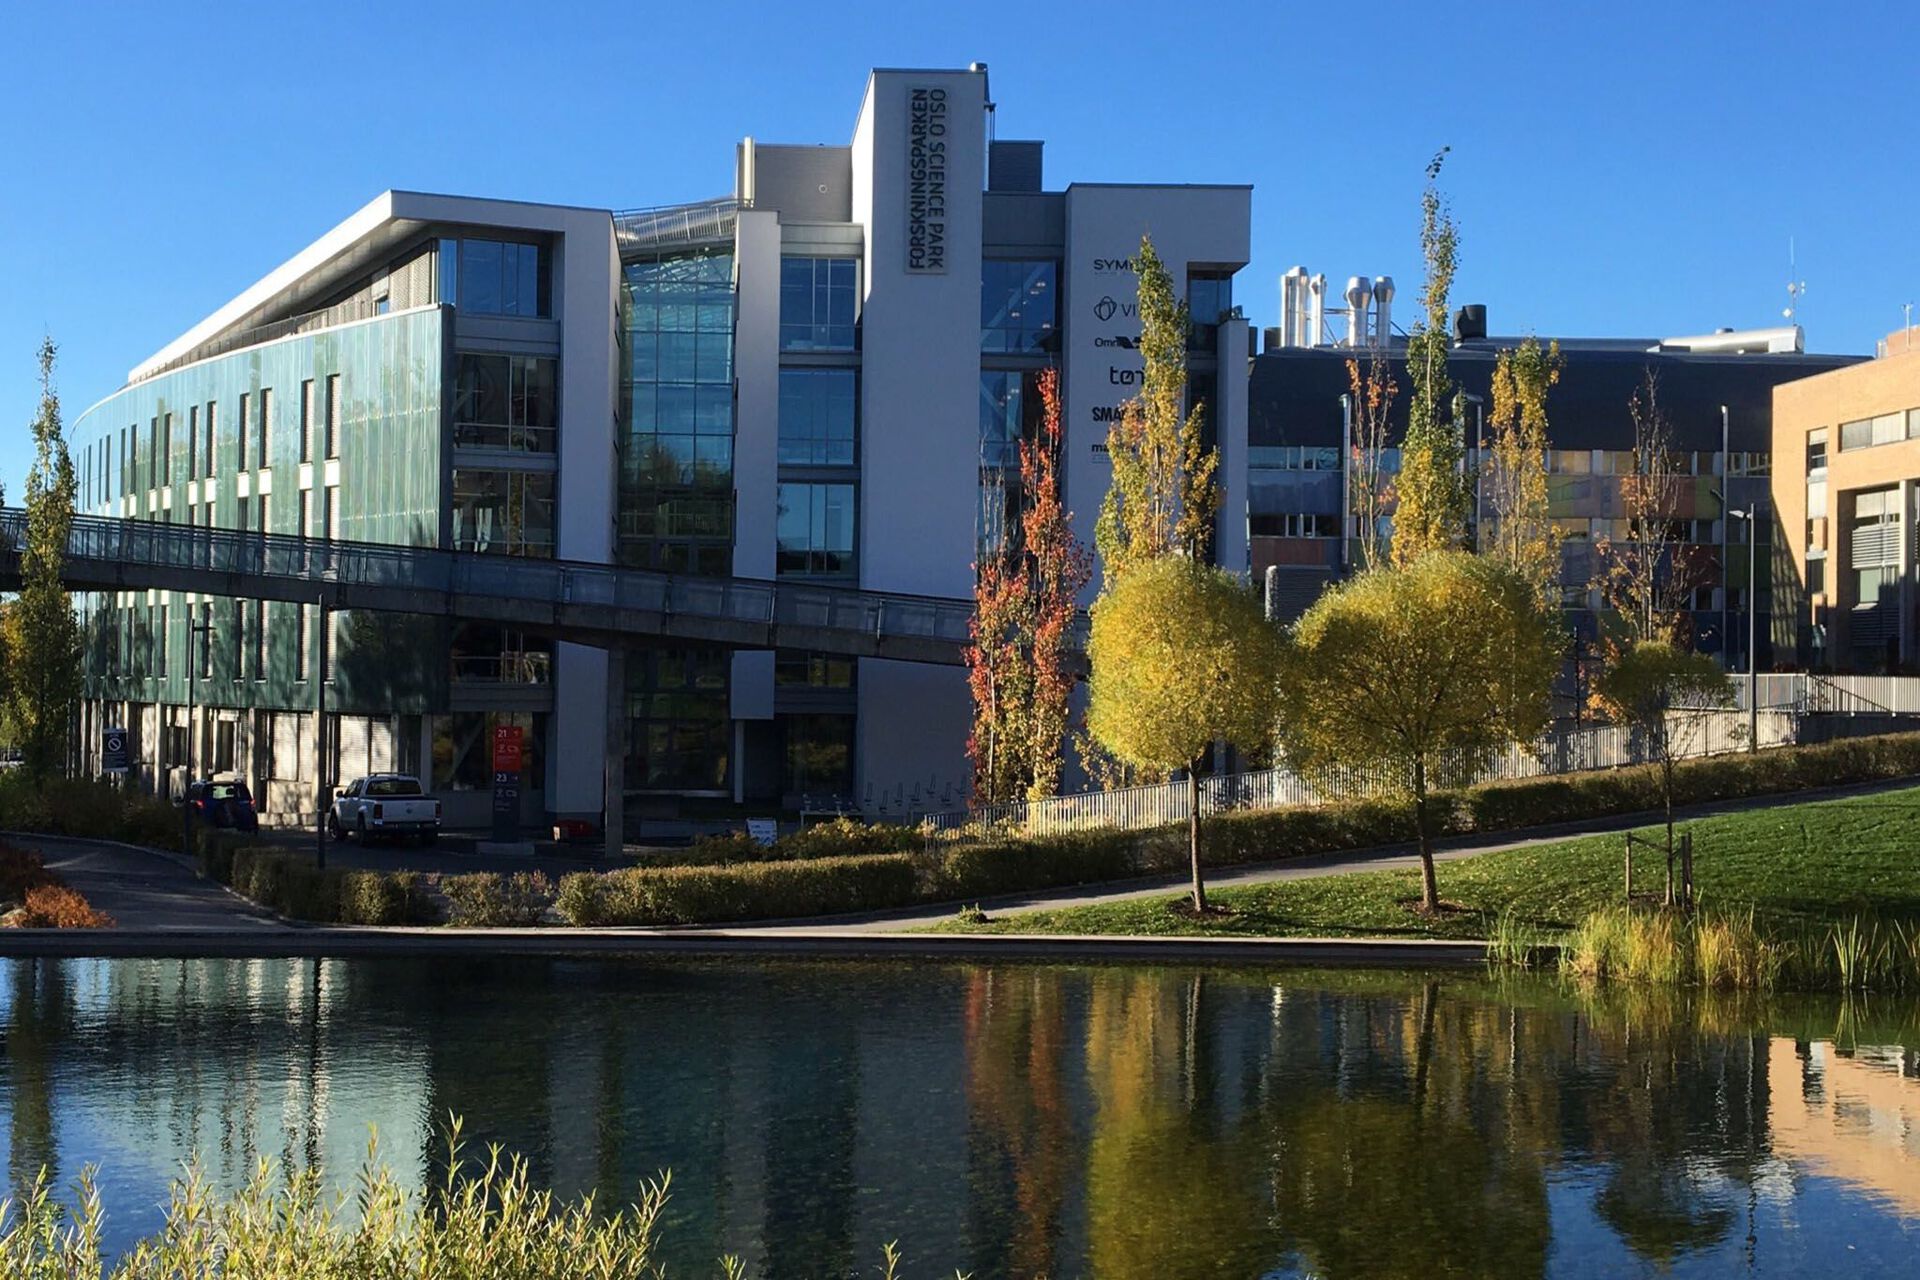 ARENA at the University of Oslo hosted the conference at Oslo Science Park in beautiful autumn weather